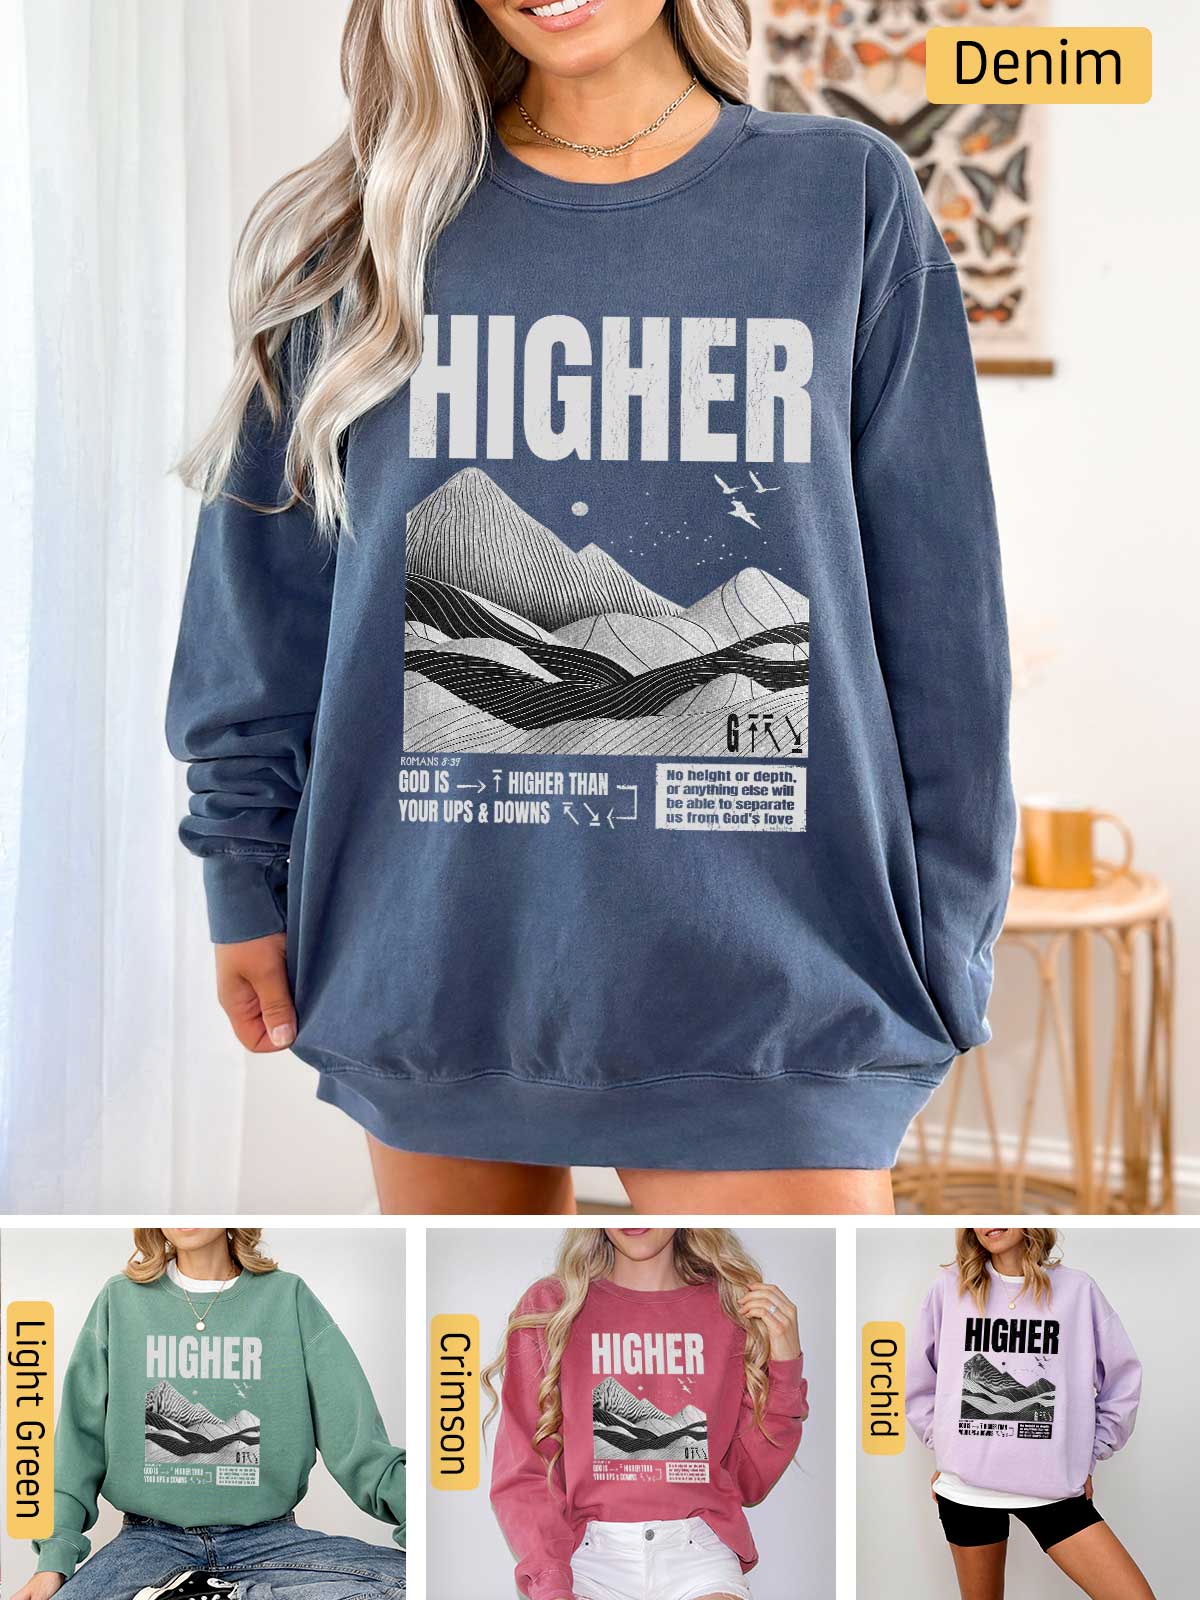 a woman wearing a sweatshirt with the words higher printed on it